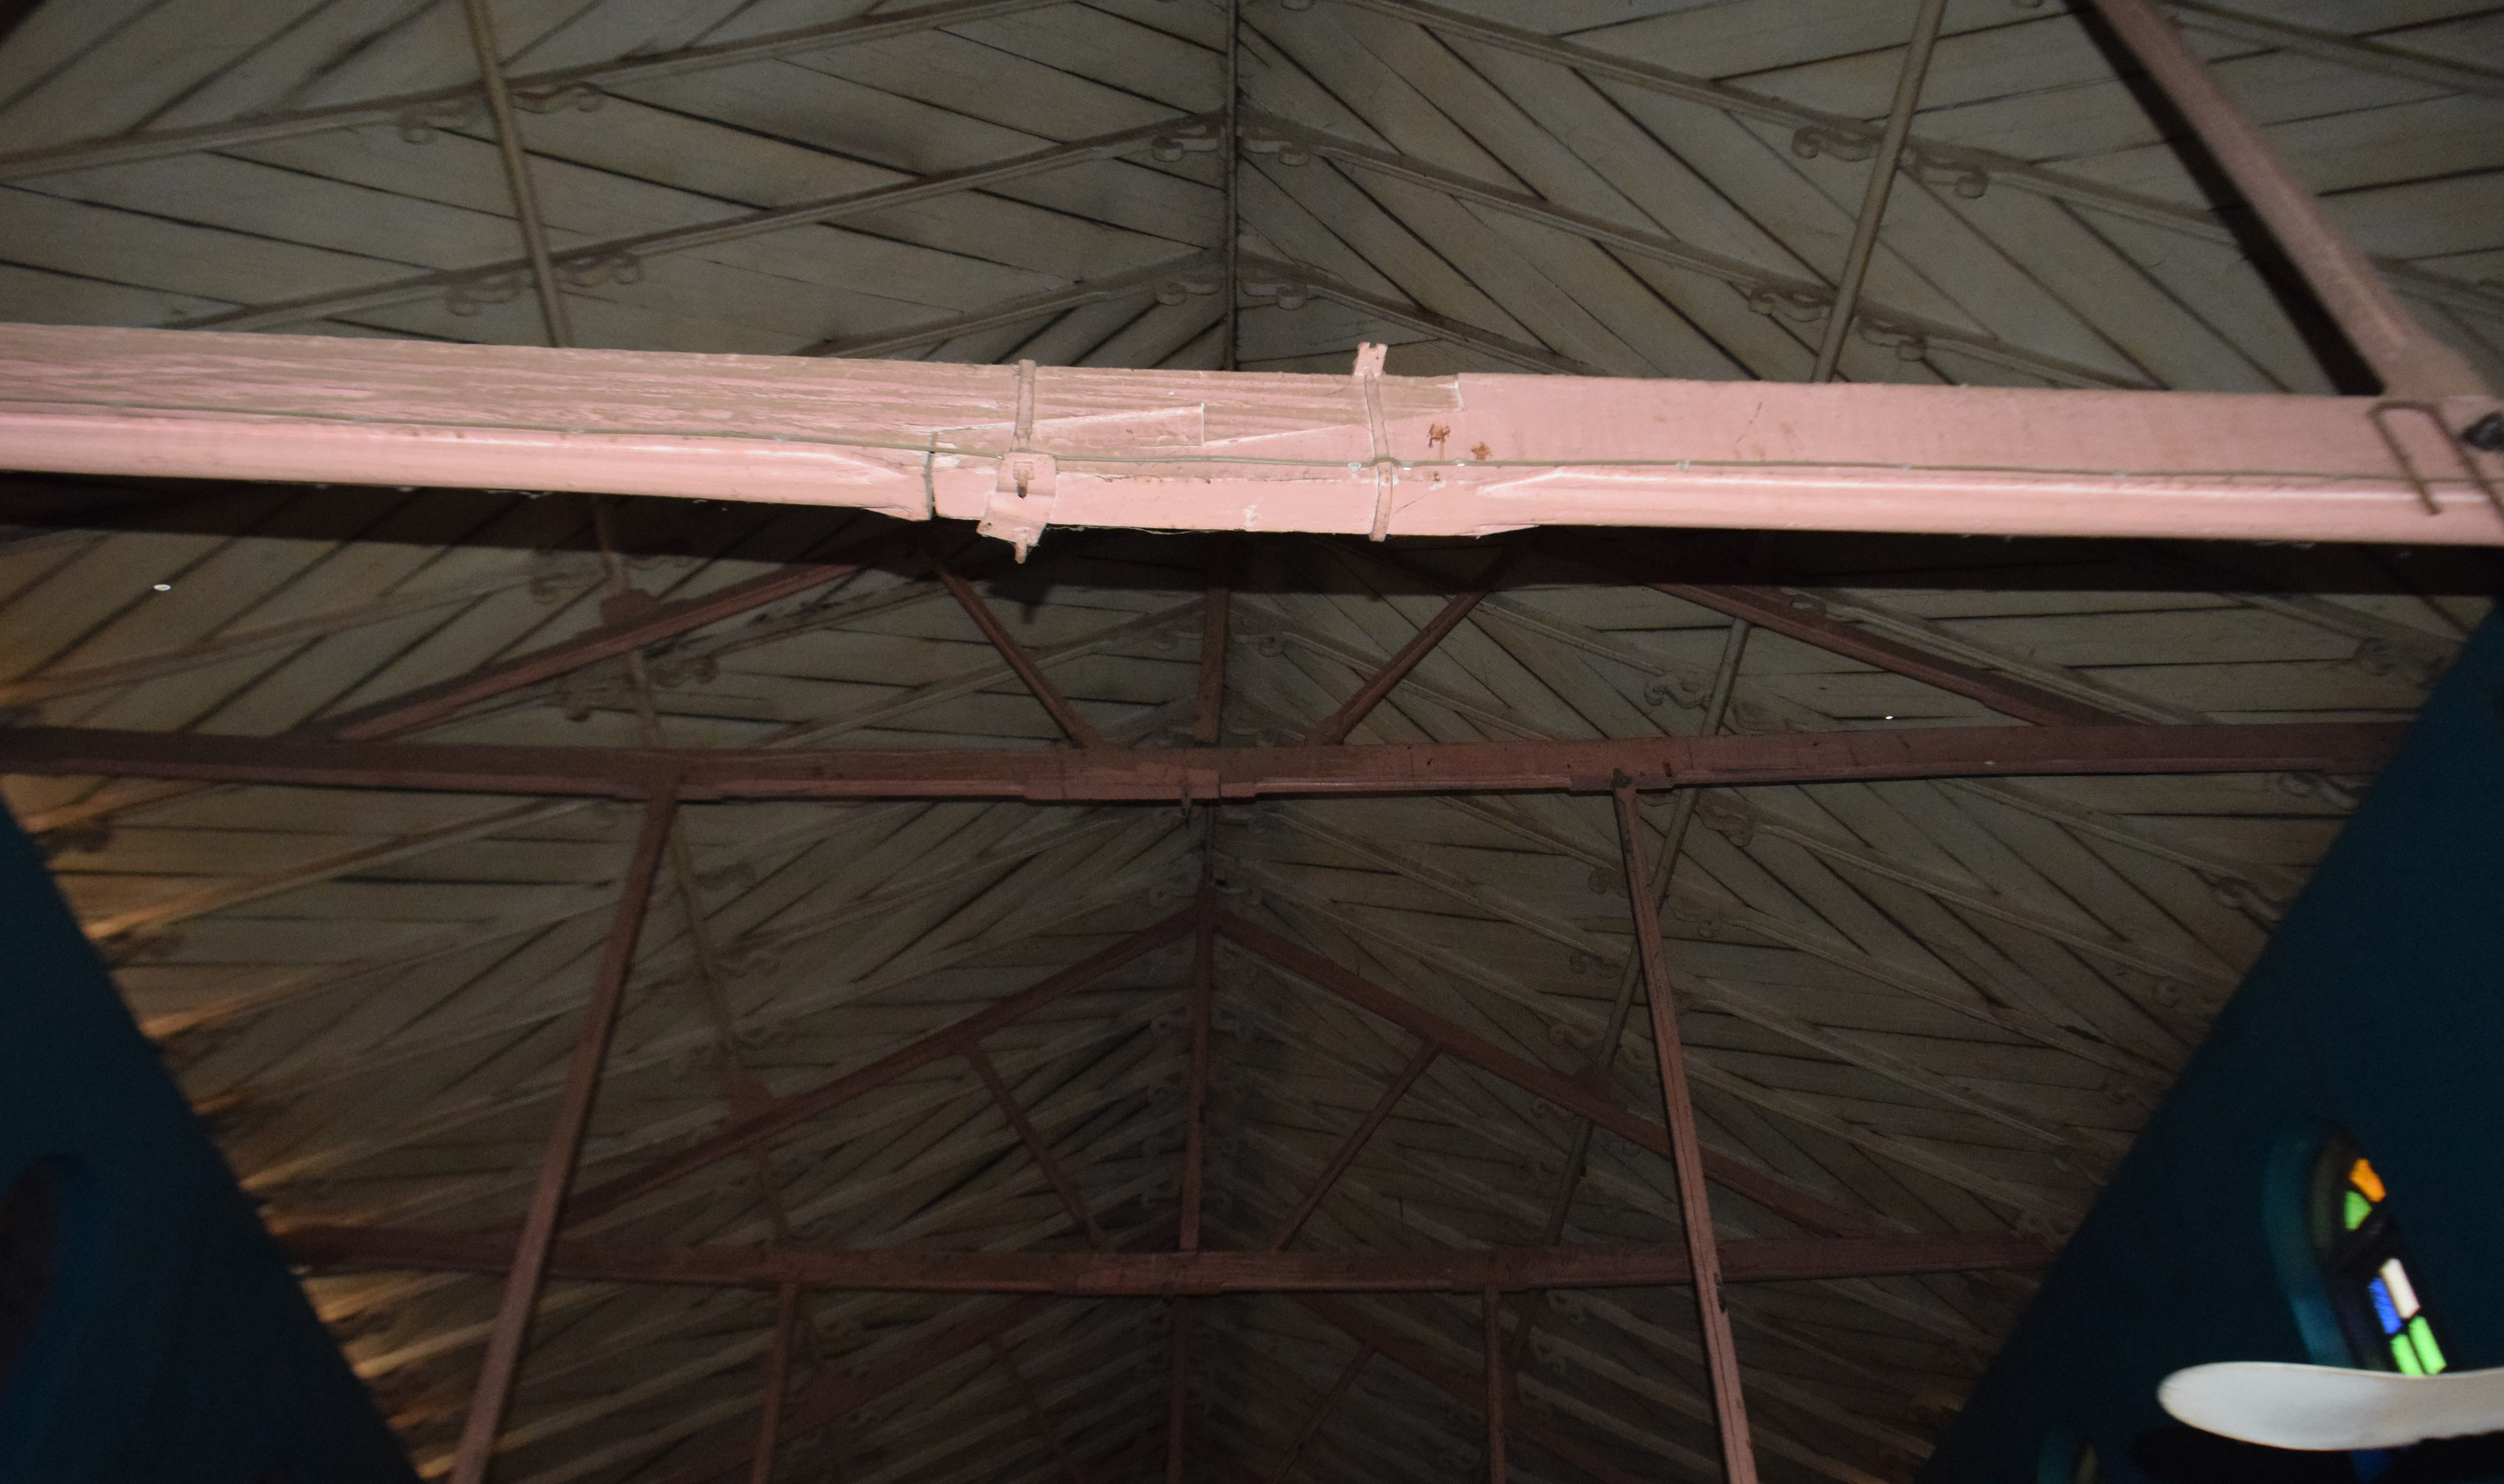 Ode Omu Central Mosque - Wooden trusses